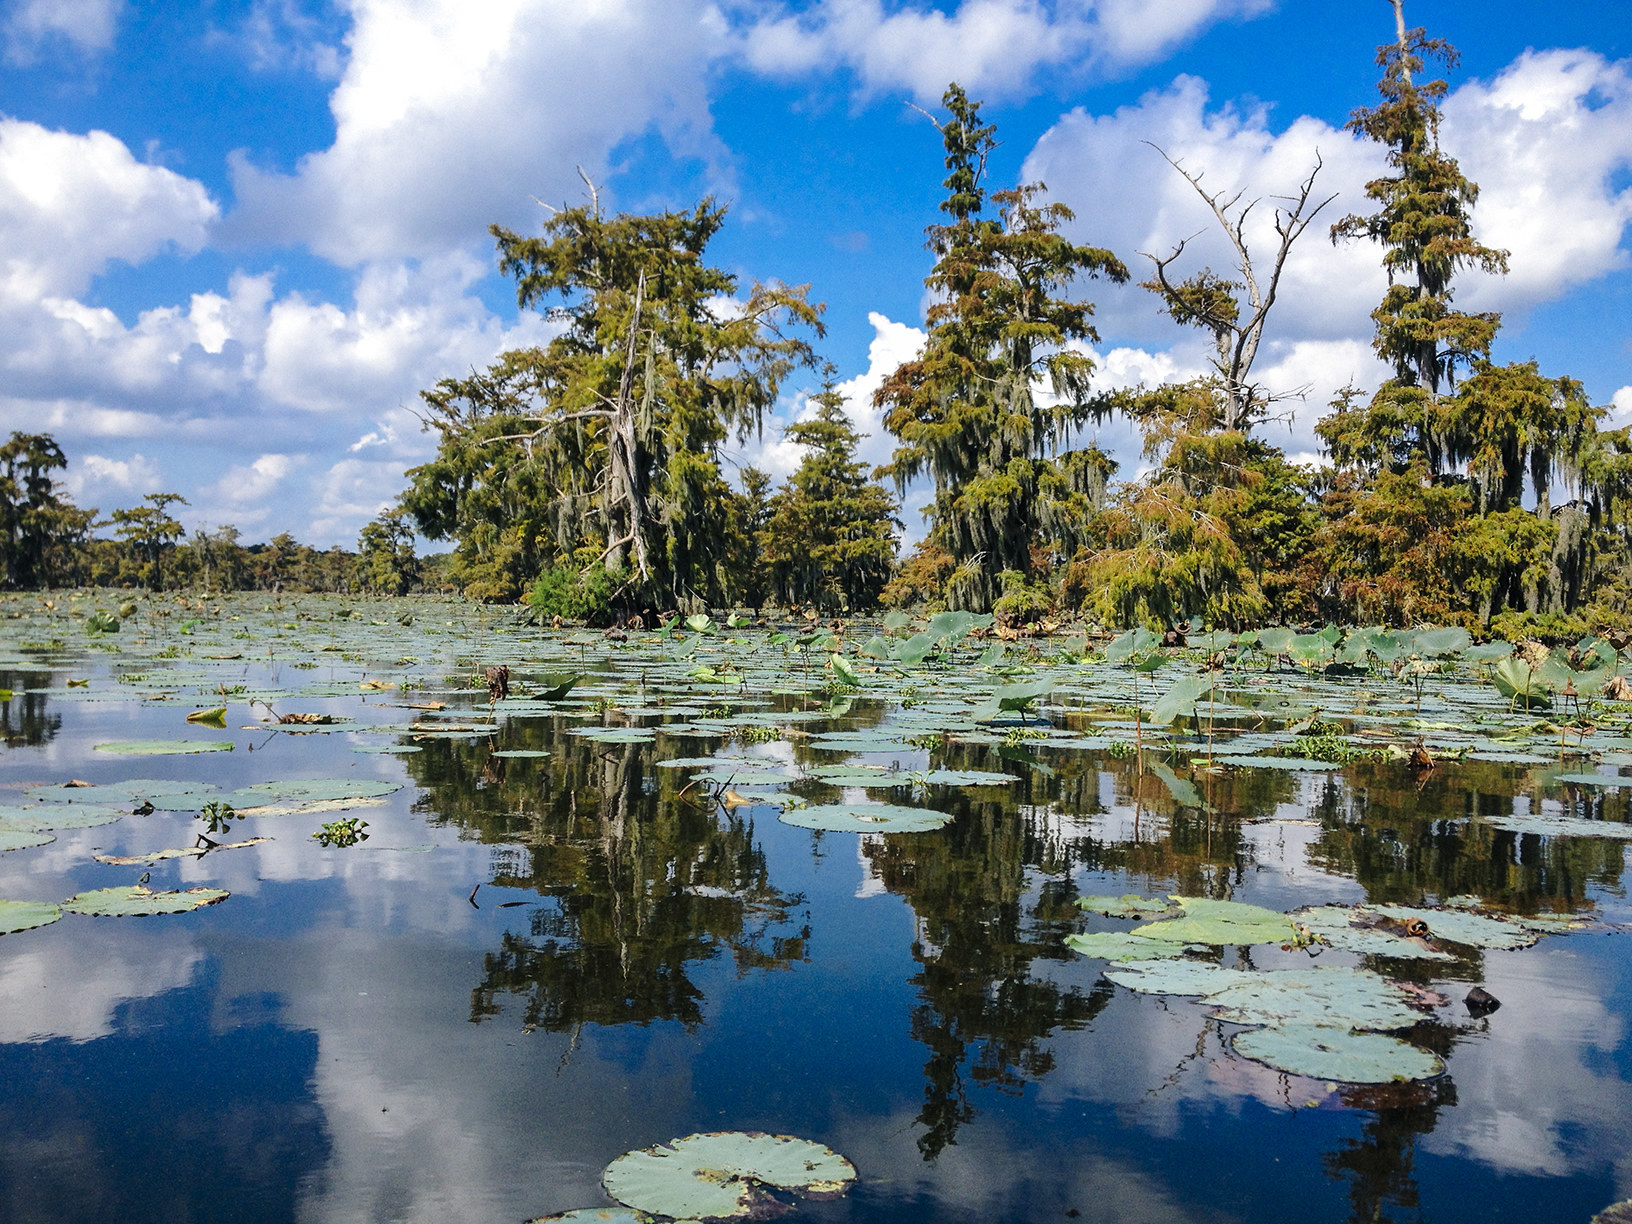 Louisiana swamp with cypress trees and water lilies.